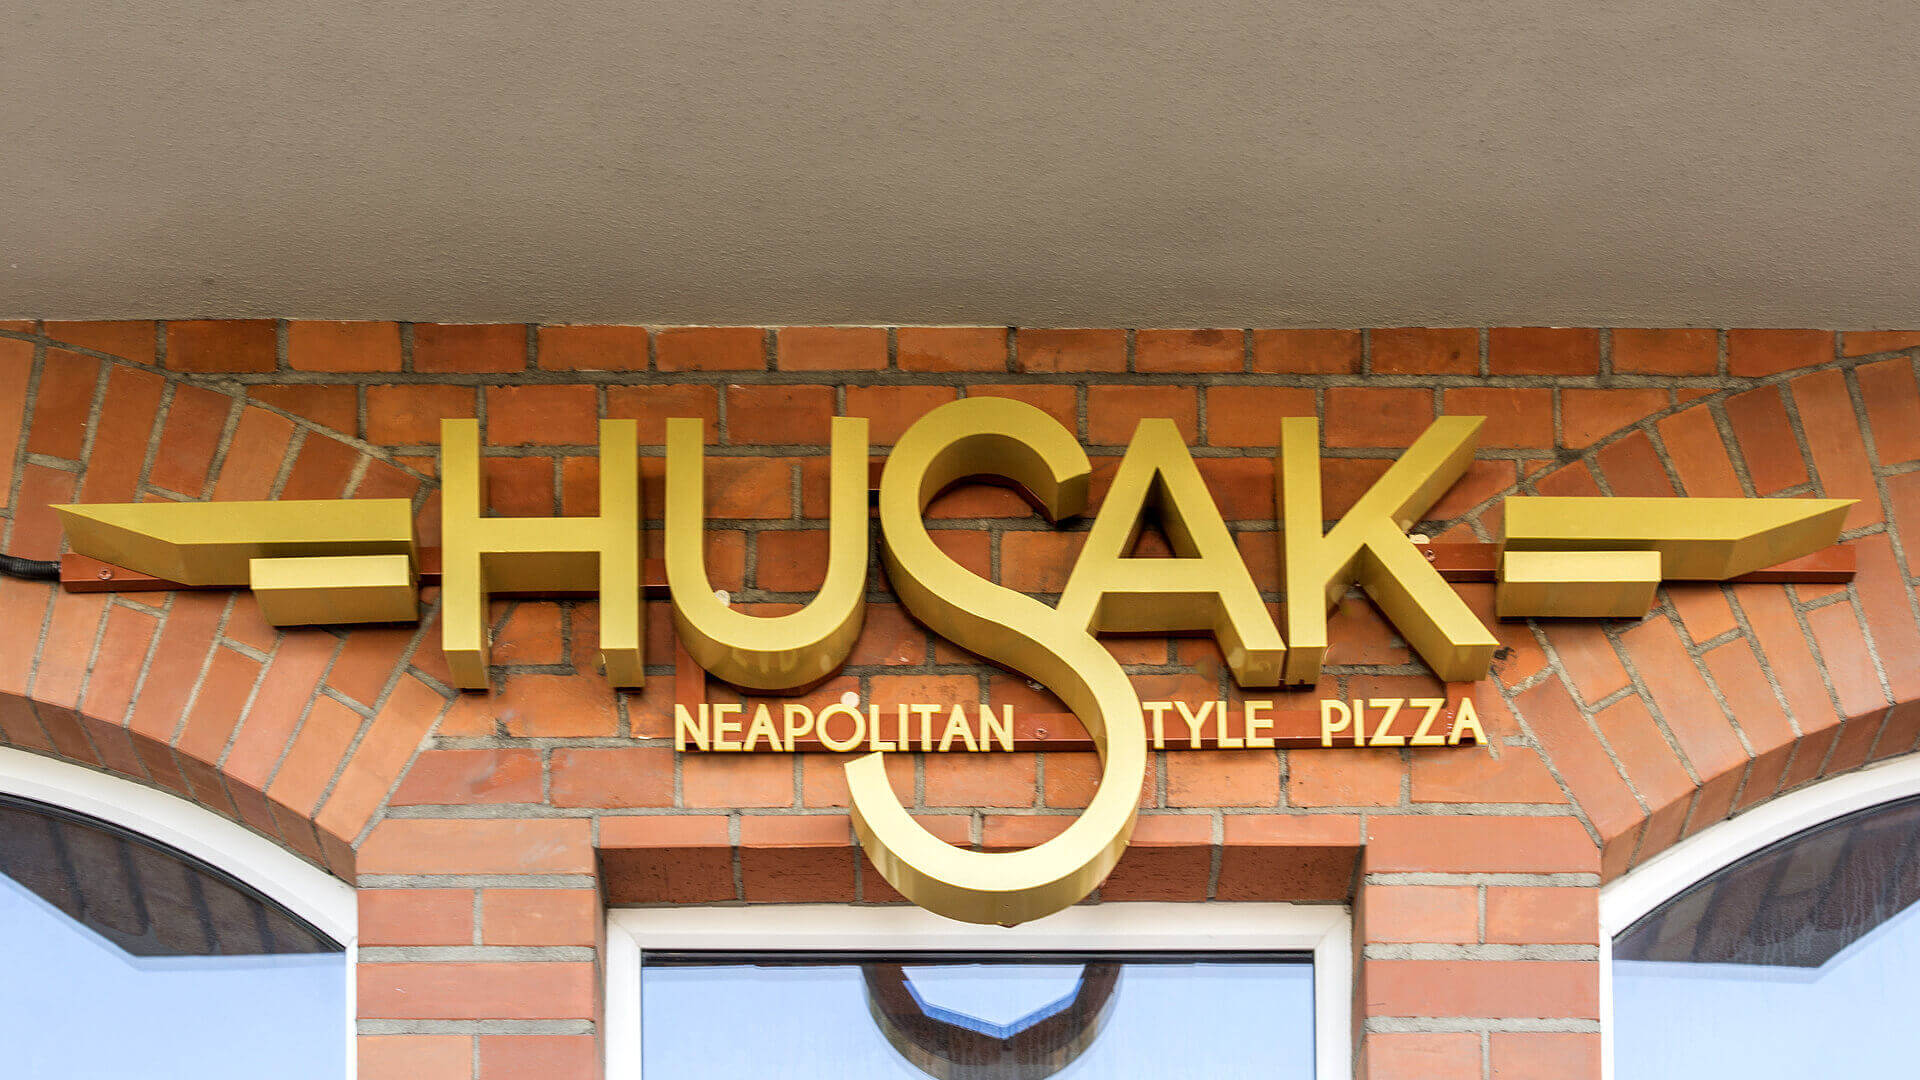 husak pizzeria - husak-pizzeria-zlote-letters-spatial-illuminated-tile-letters-on-the-wall-with-cegel-over-the-entry-over-the-surface-sign-mounted-to-the-wall-grunwaldzka-gdansk (14)